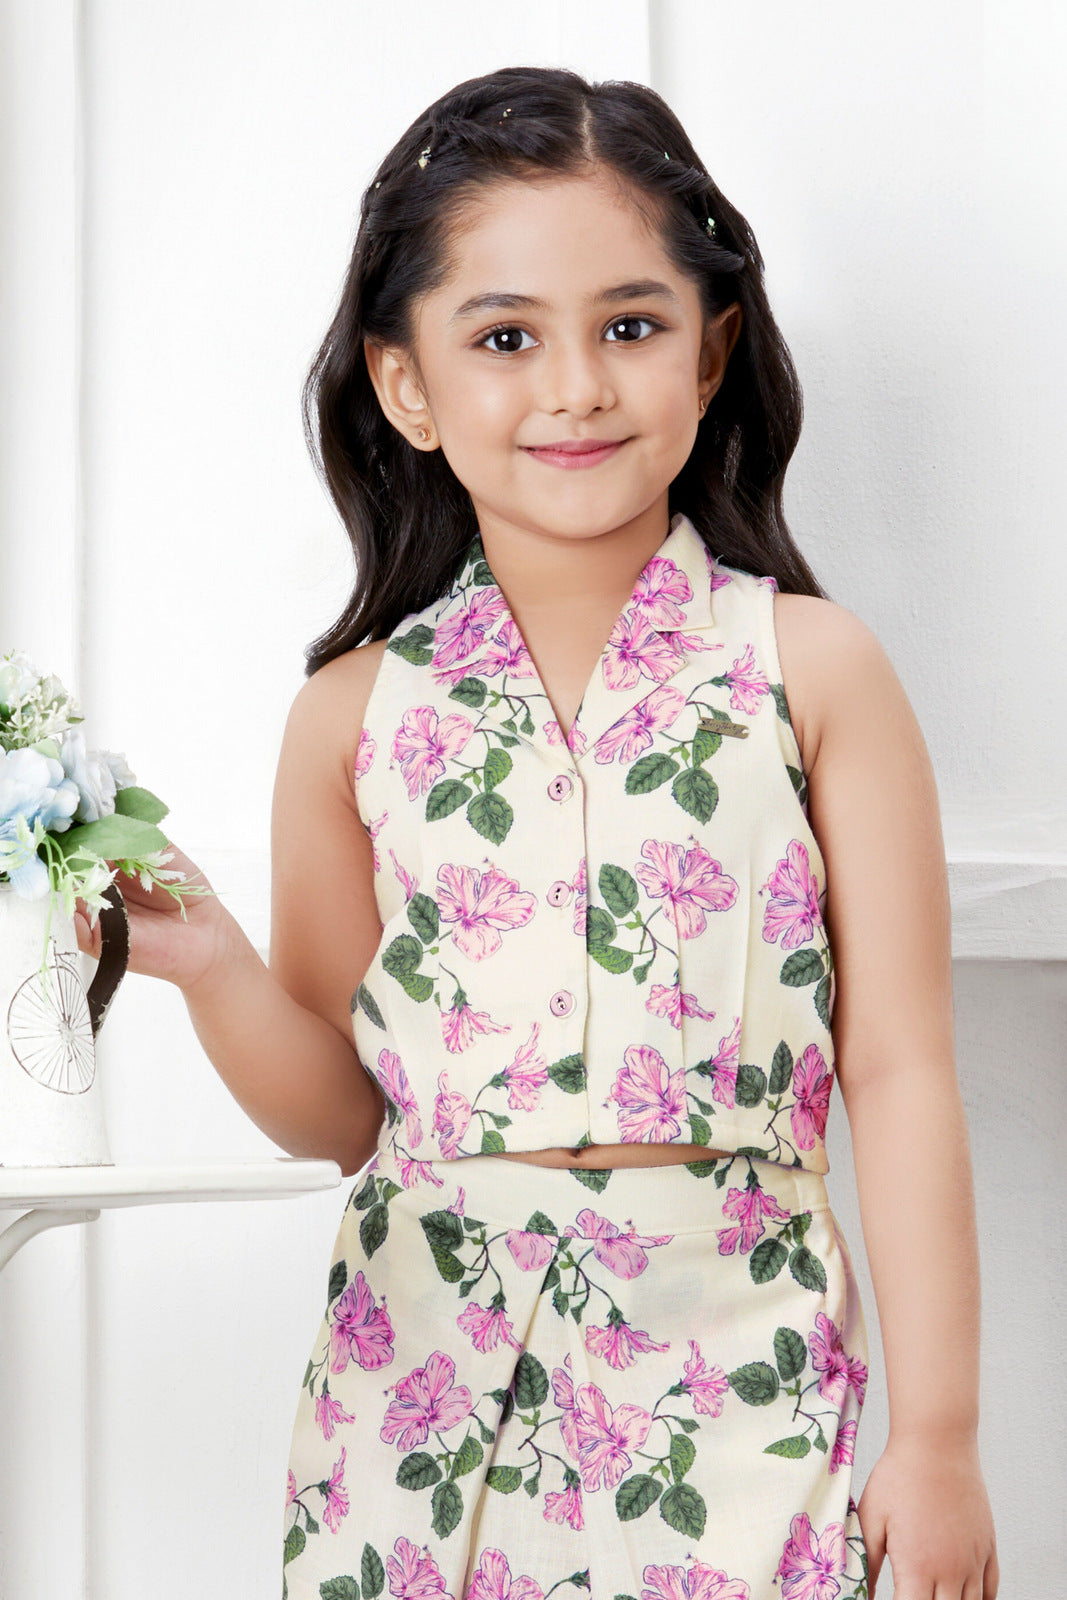 Cream with Floral Print Top and Divider Skirt for Girls